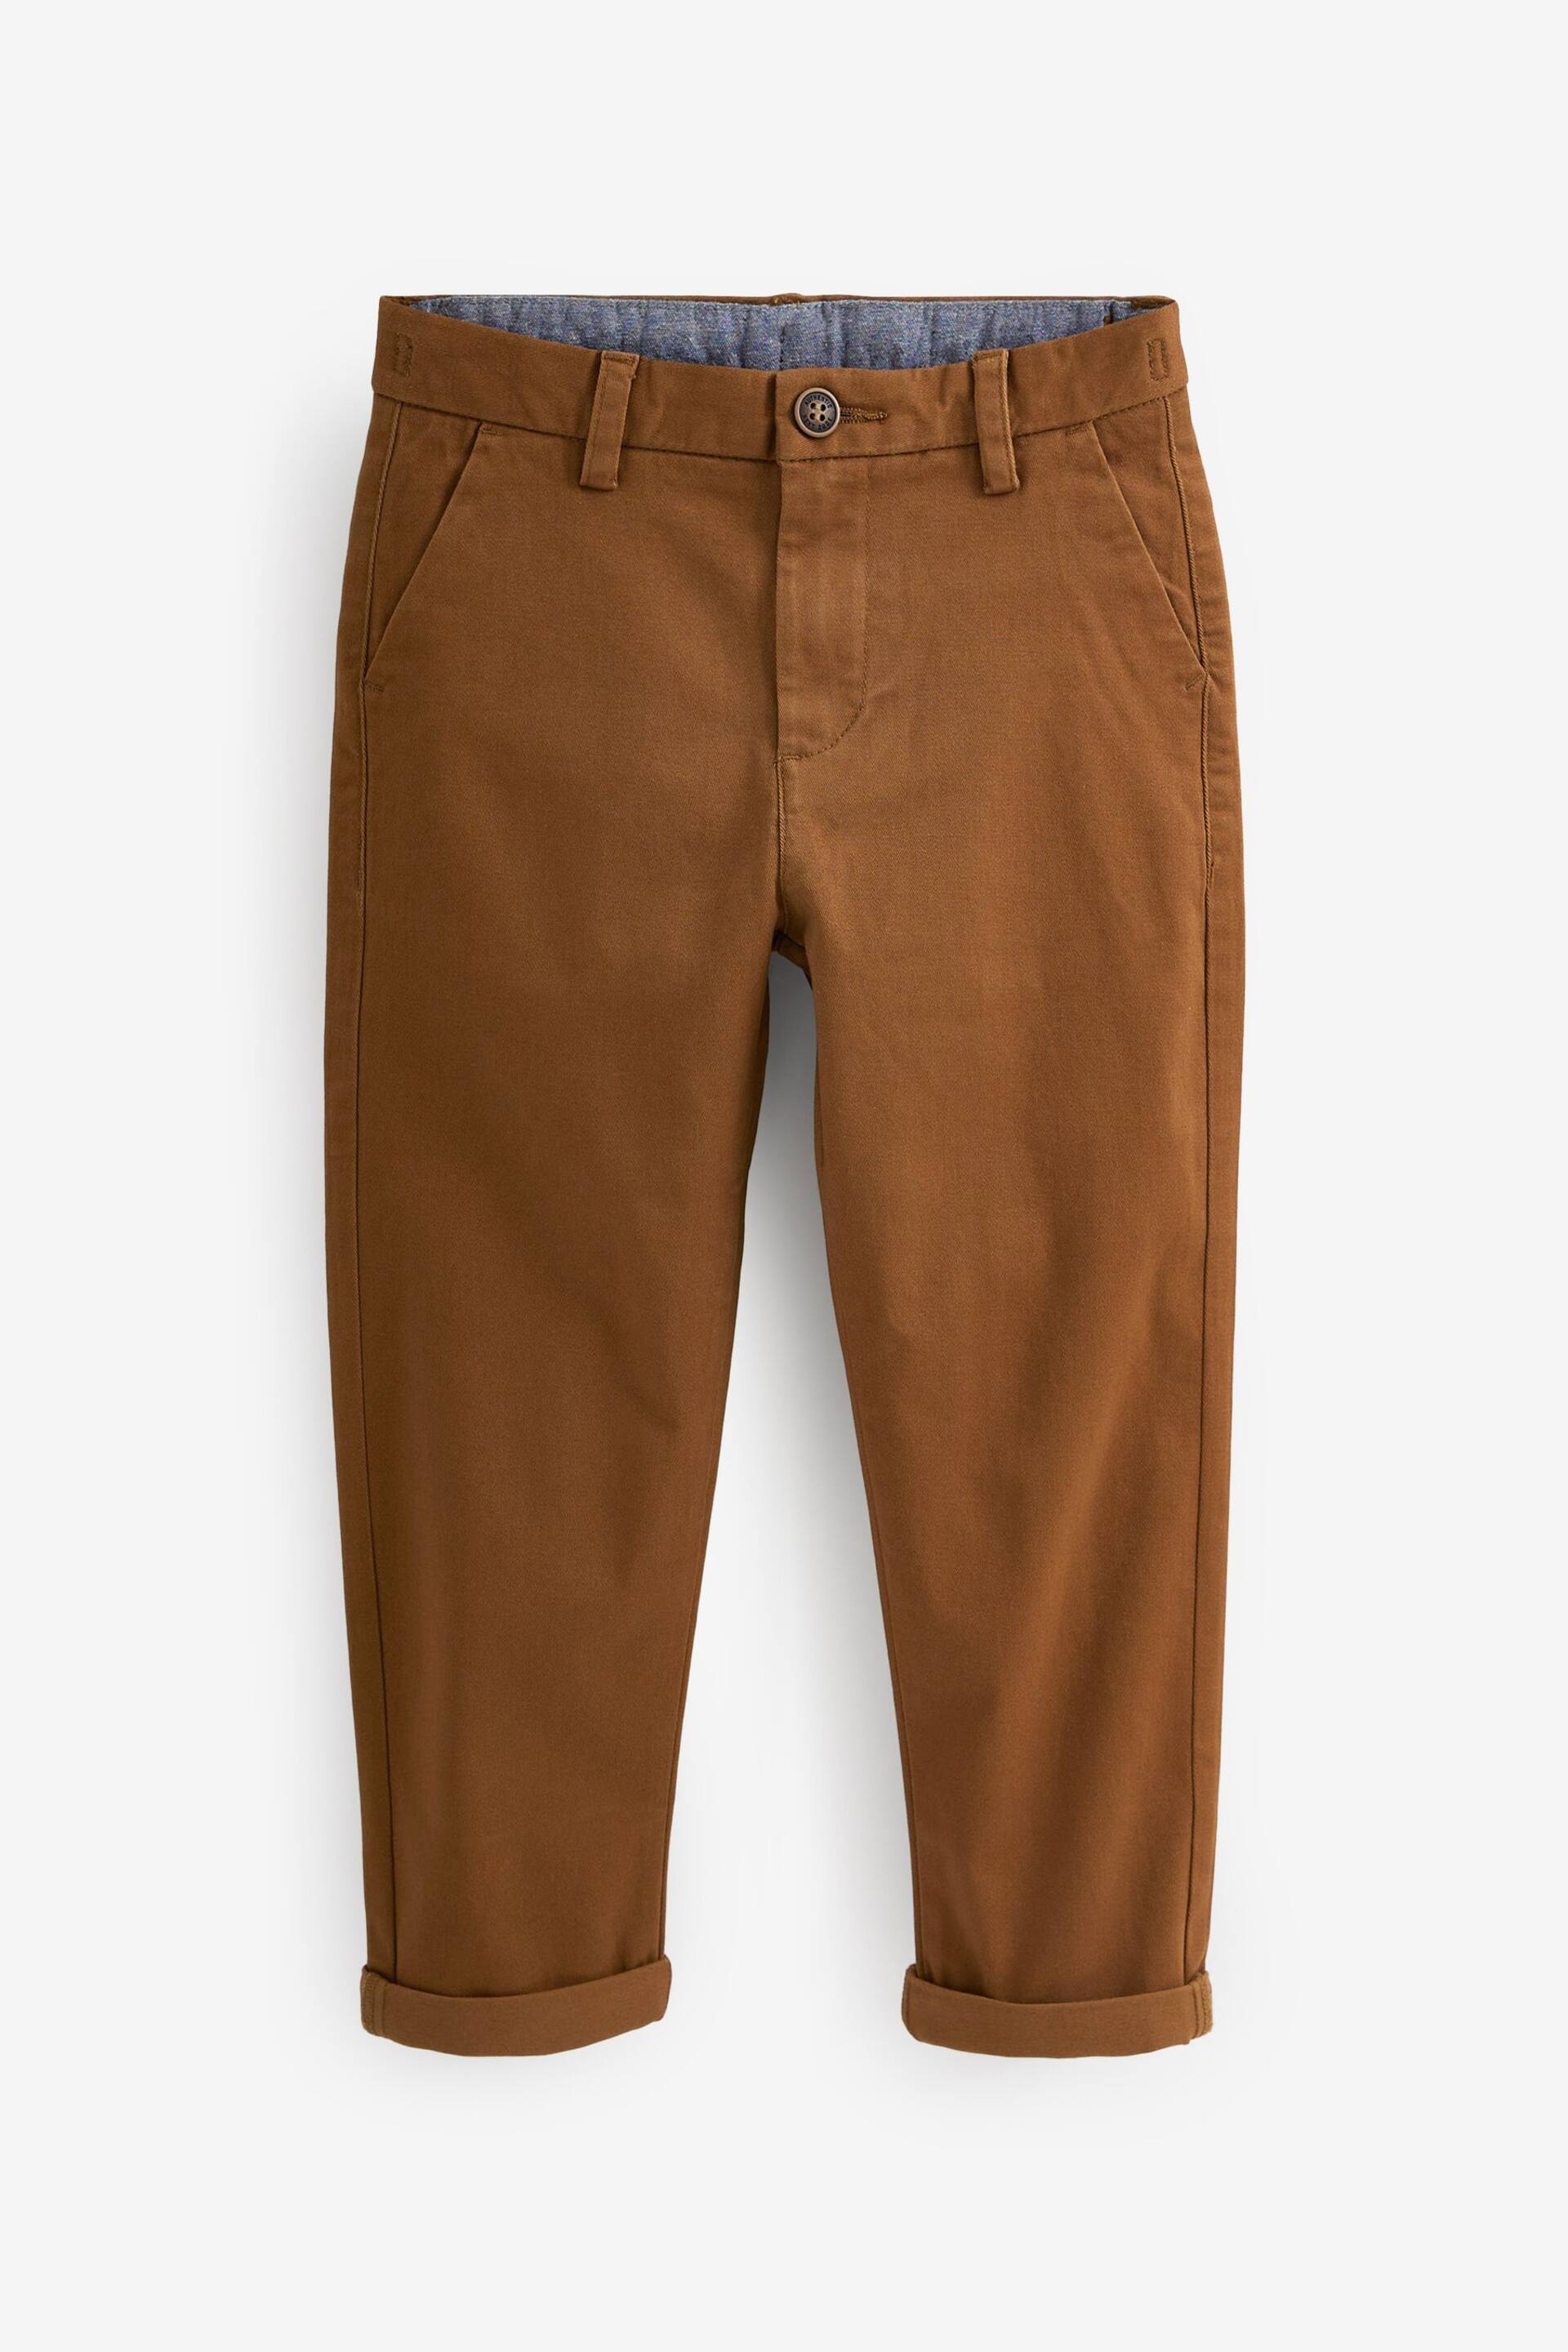 Ginger/Tan Brown Tapered Loose Fit Stretch Chino Trousers (3-17yrs) - Image 1 of 2